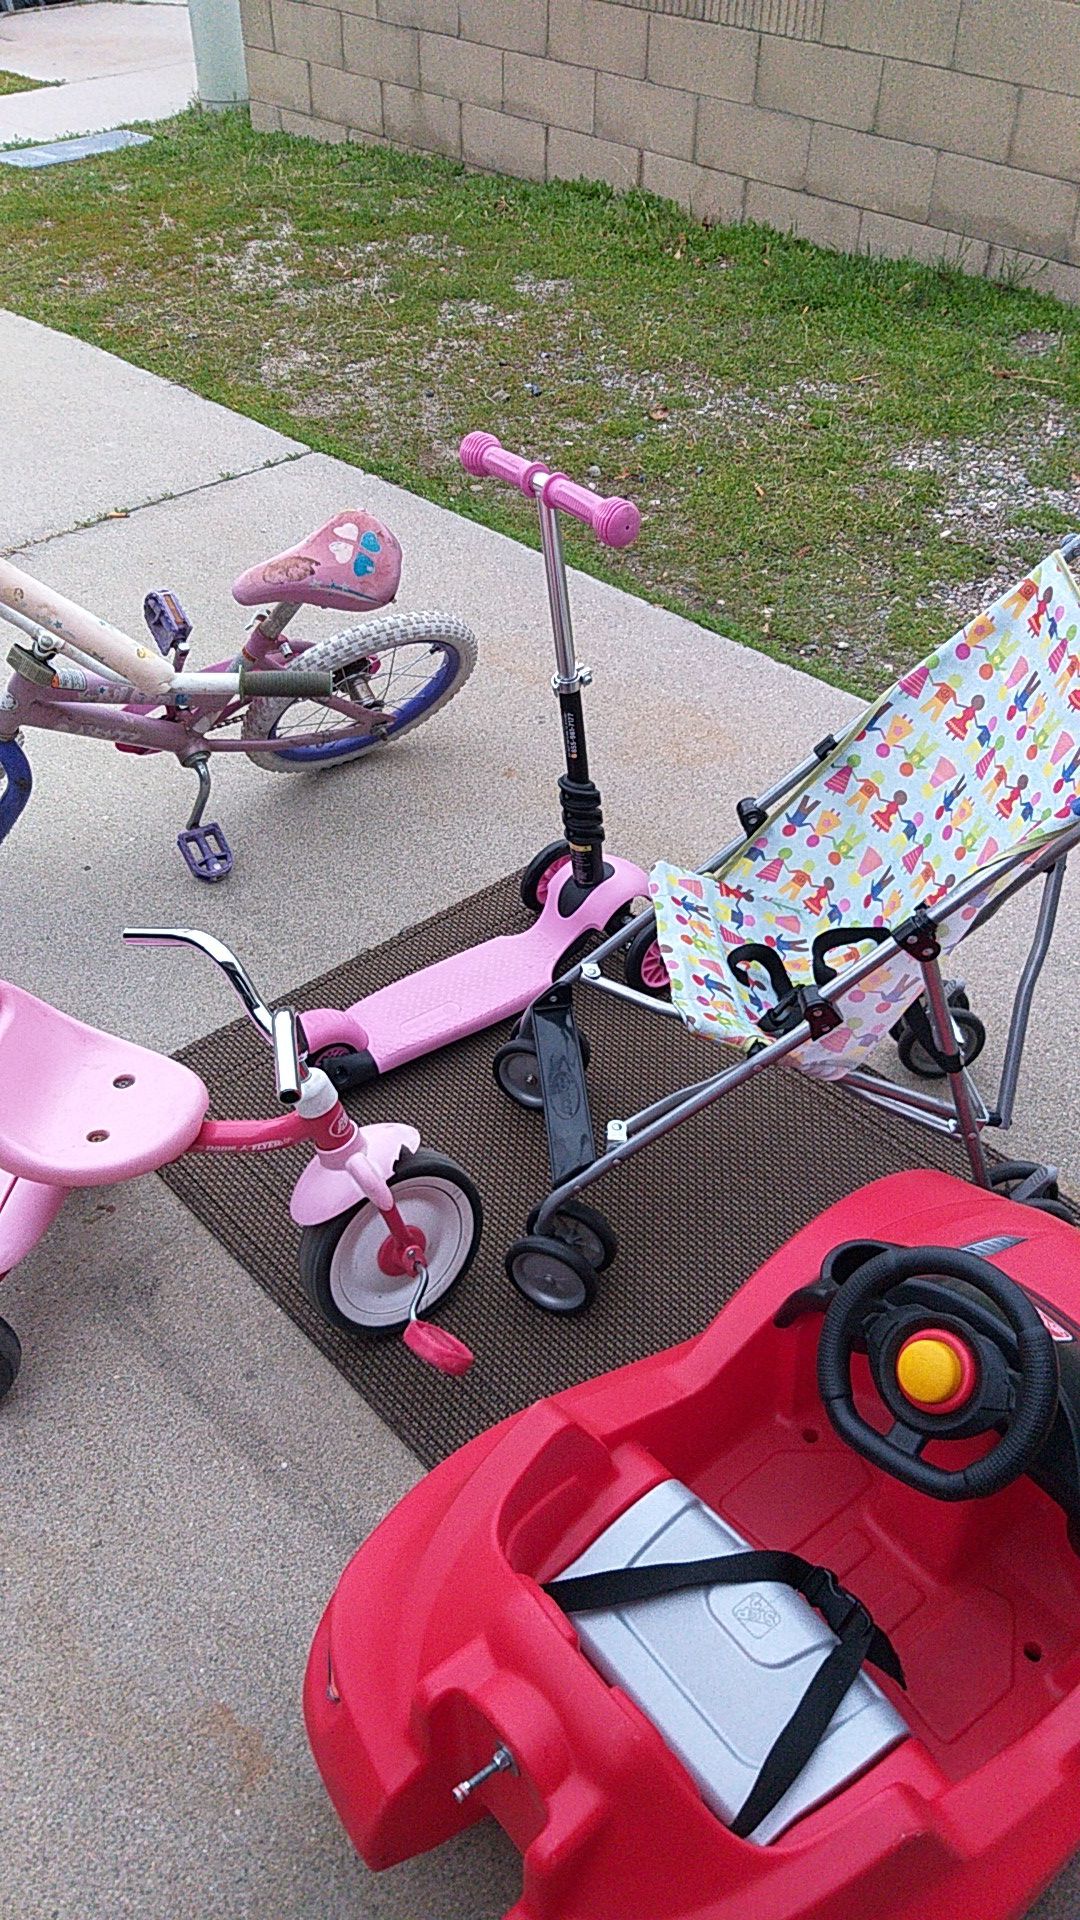 Kids toys and stroller $35 for all